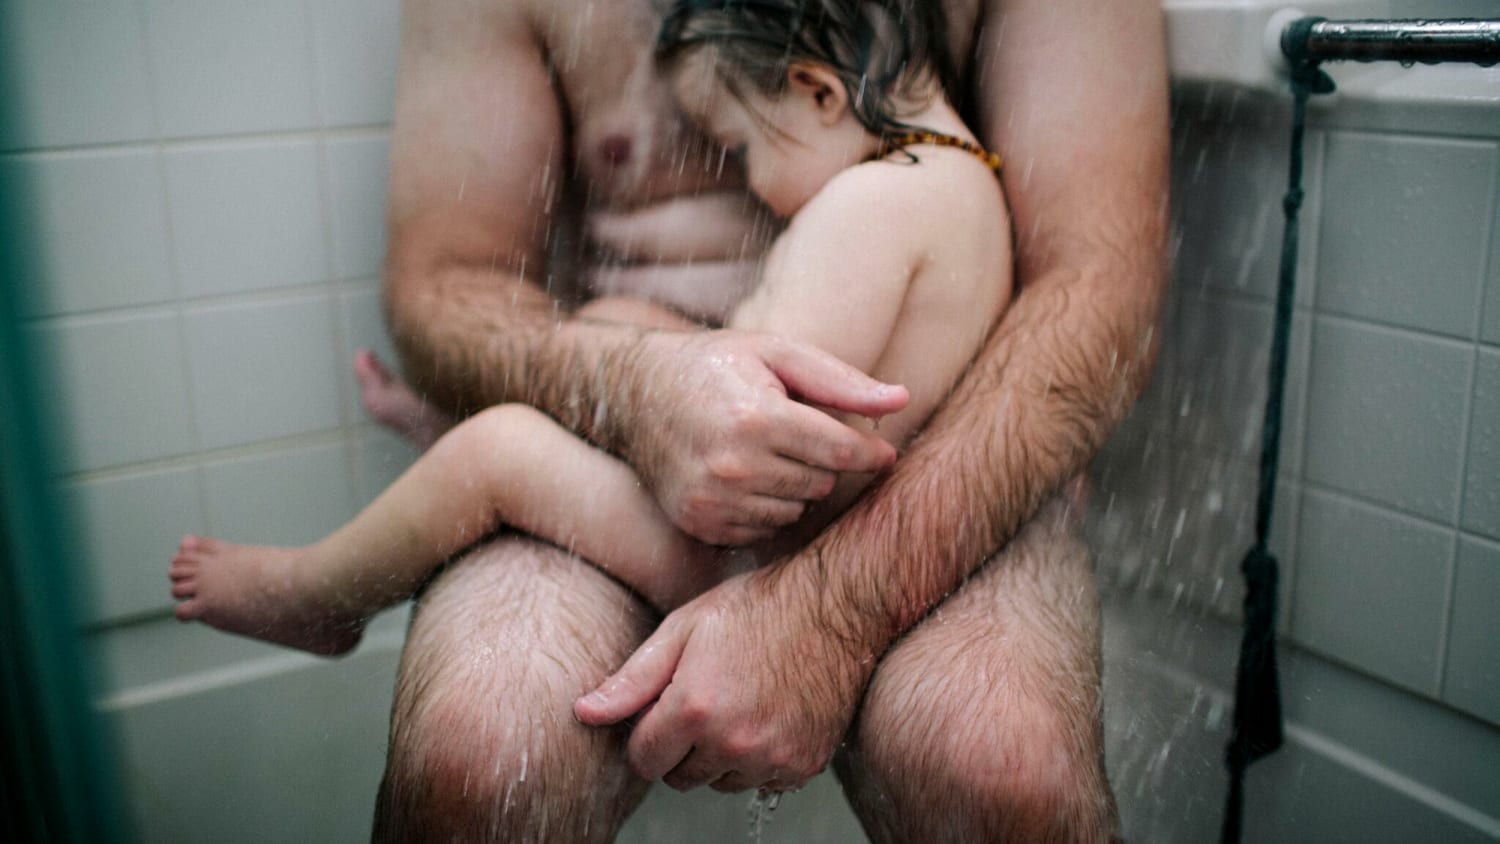 Photo of a dad comforting his son in the shower goes viral.